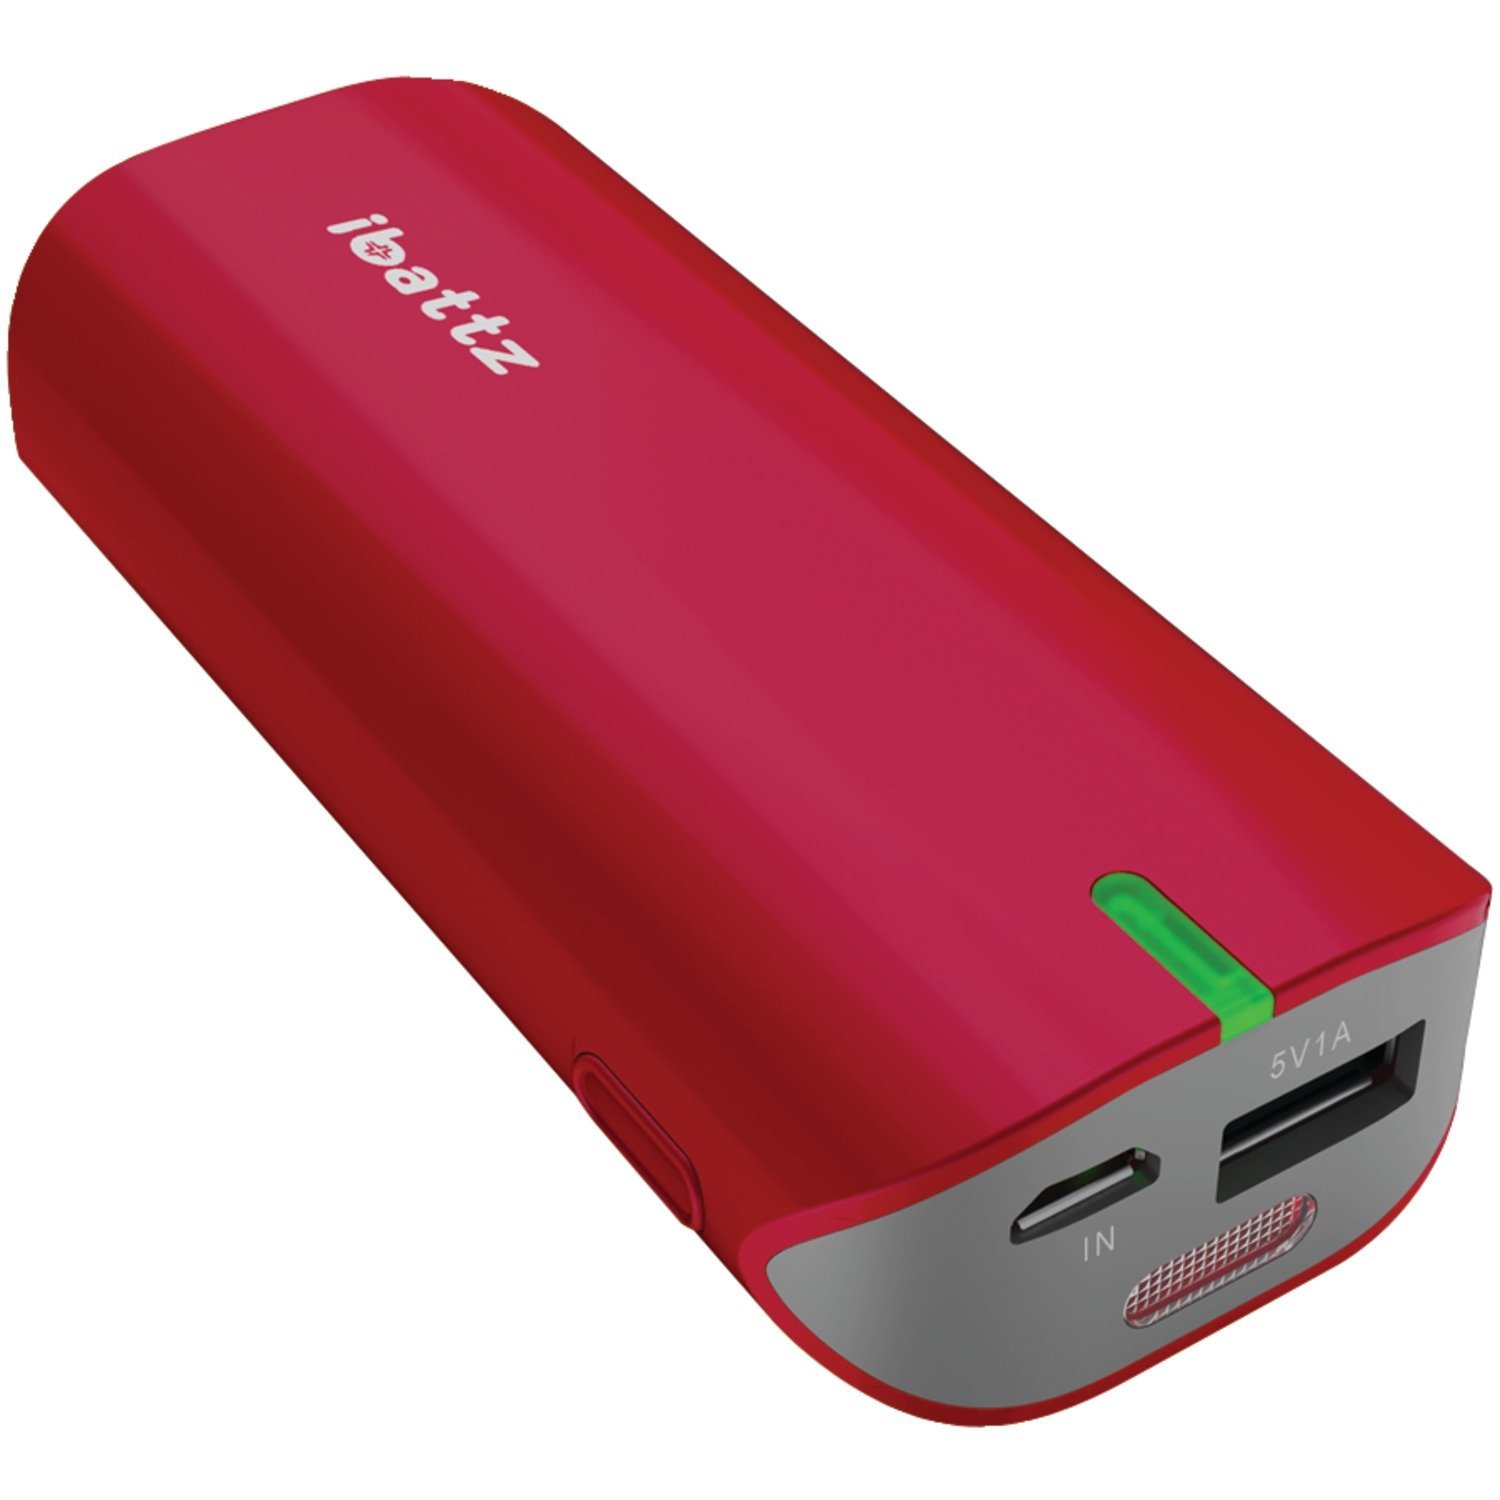 Disney Finds – Portable Battery Pack for the Parks